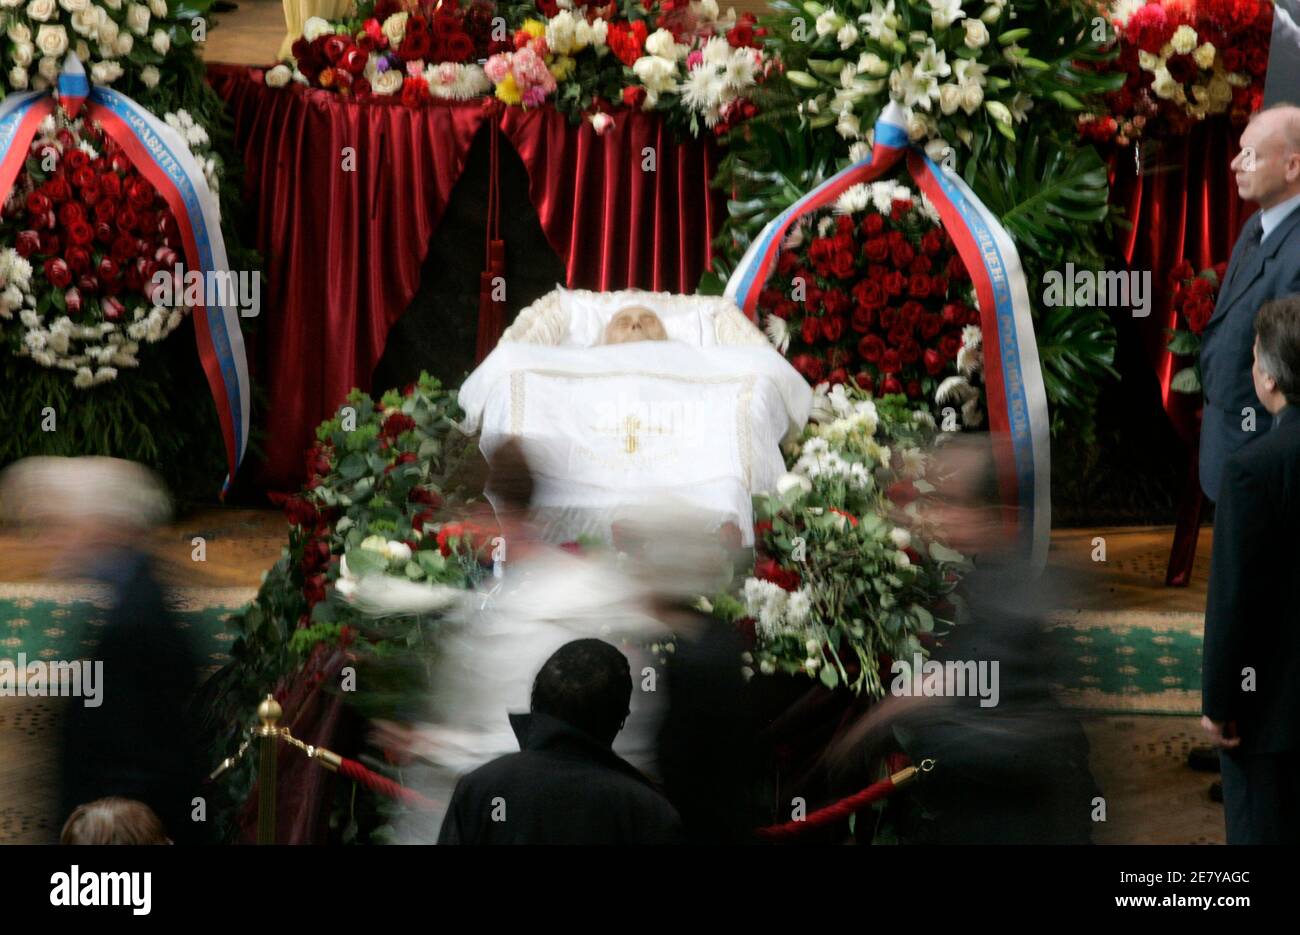 A general view of the Moscow Conservatory hall as people pay respects to Russian cellist and conductor Mstislav Rostropovich during his funeral in Moscow April 28, 2007. In death as in life Rostropovich was steeped in music when his coffin was laid in the Moscow Conservatory on Saturday.     REUTERS/Alexander Natruskin (RUSSIA) Stock Photo